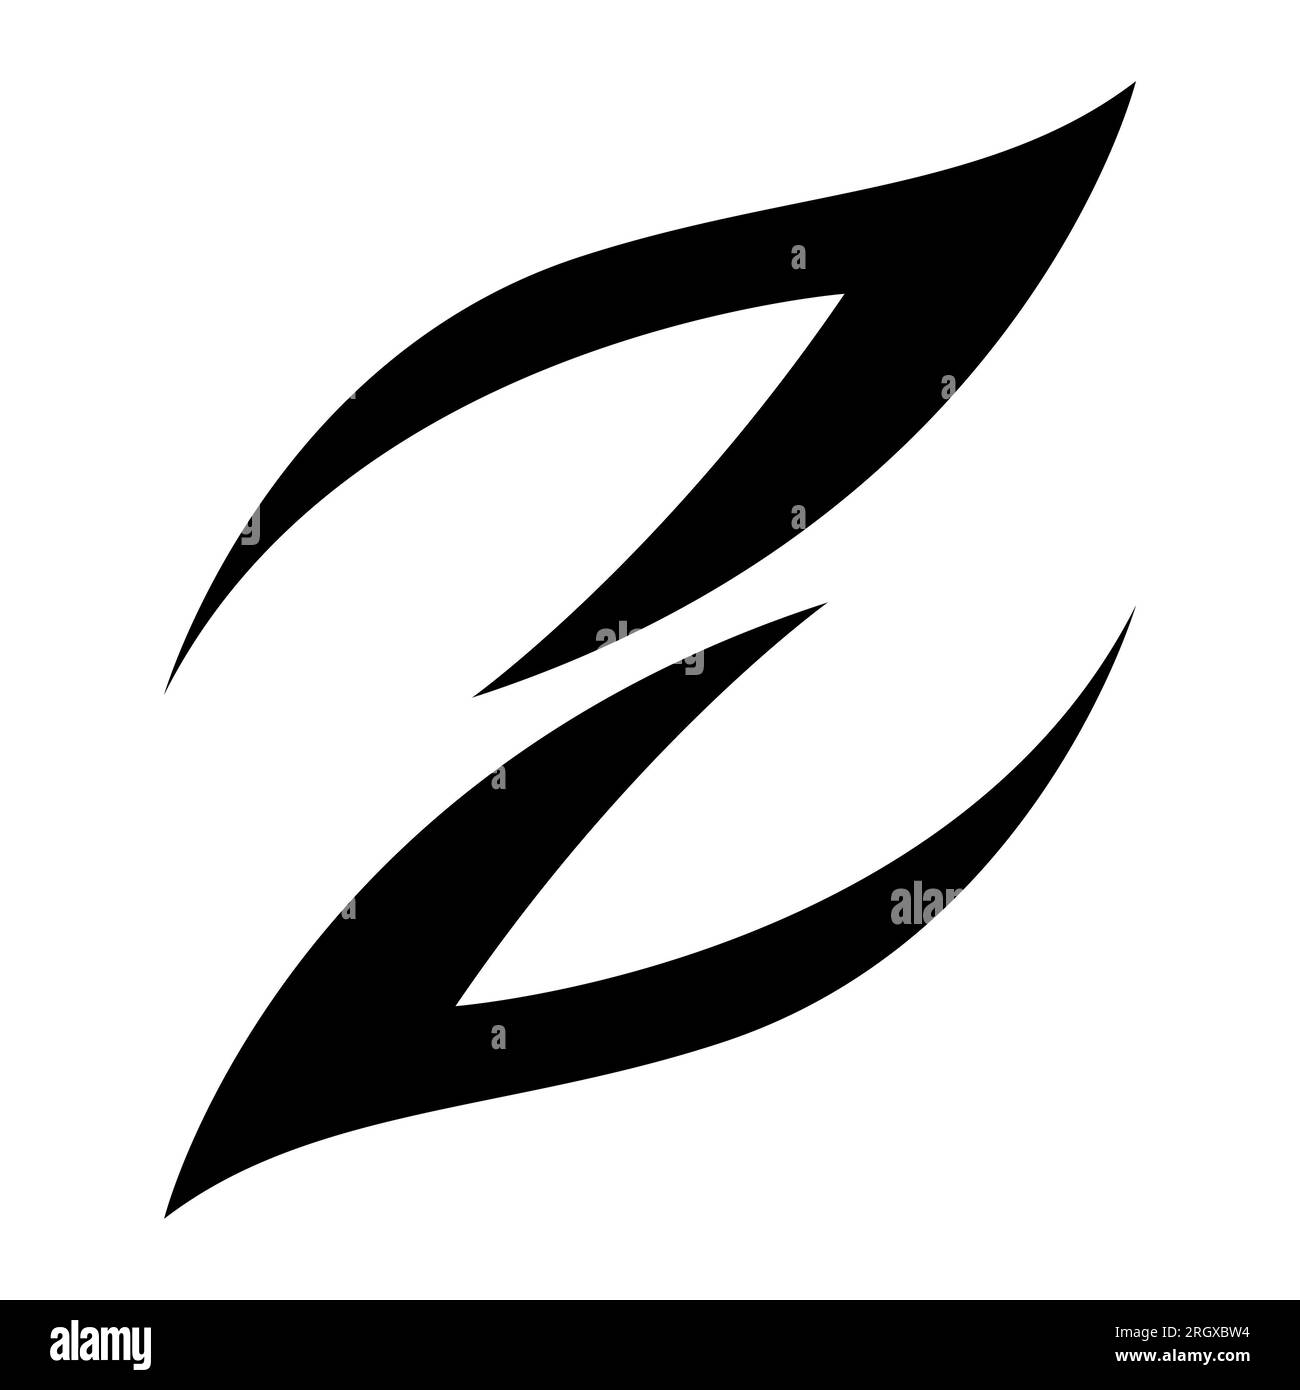 Black Fire Shaped Letter Z Icon on a White Background Stock Photo